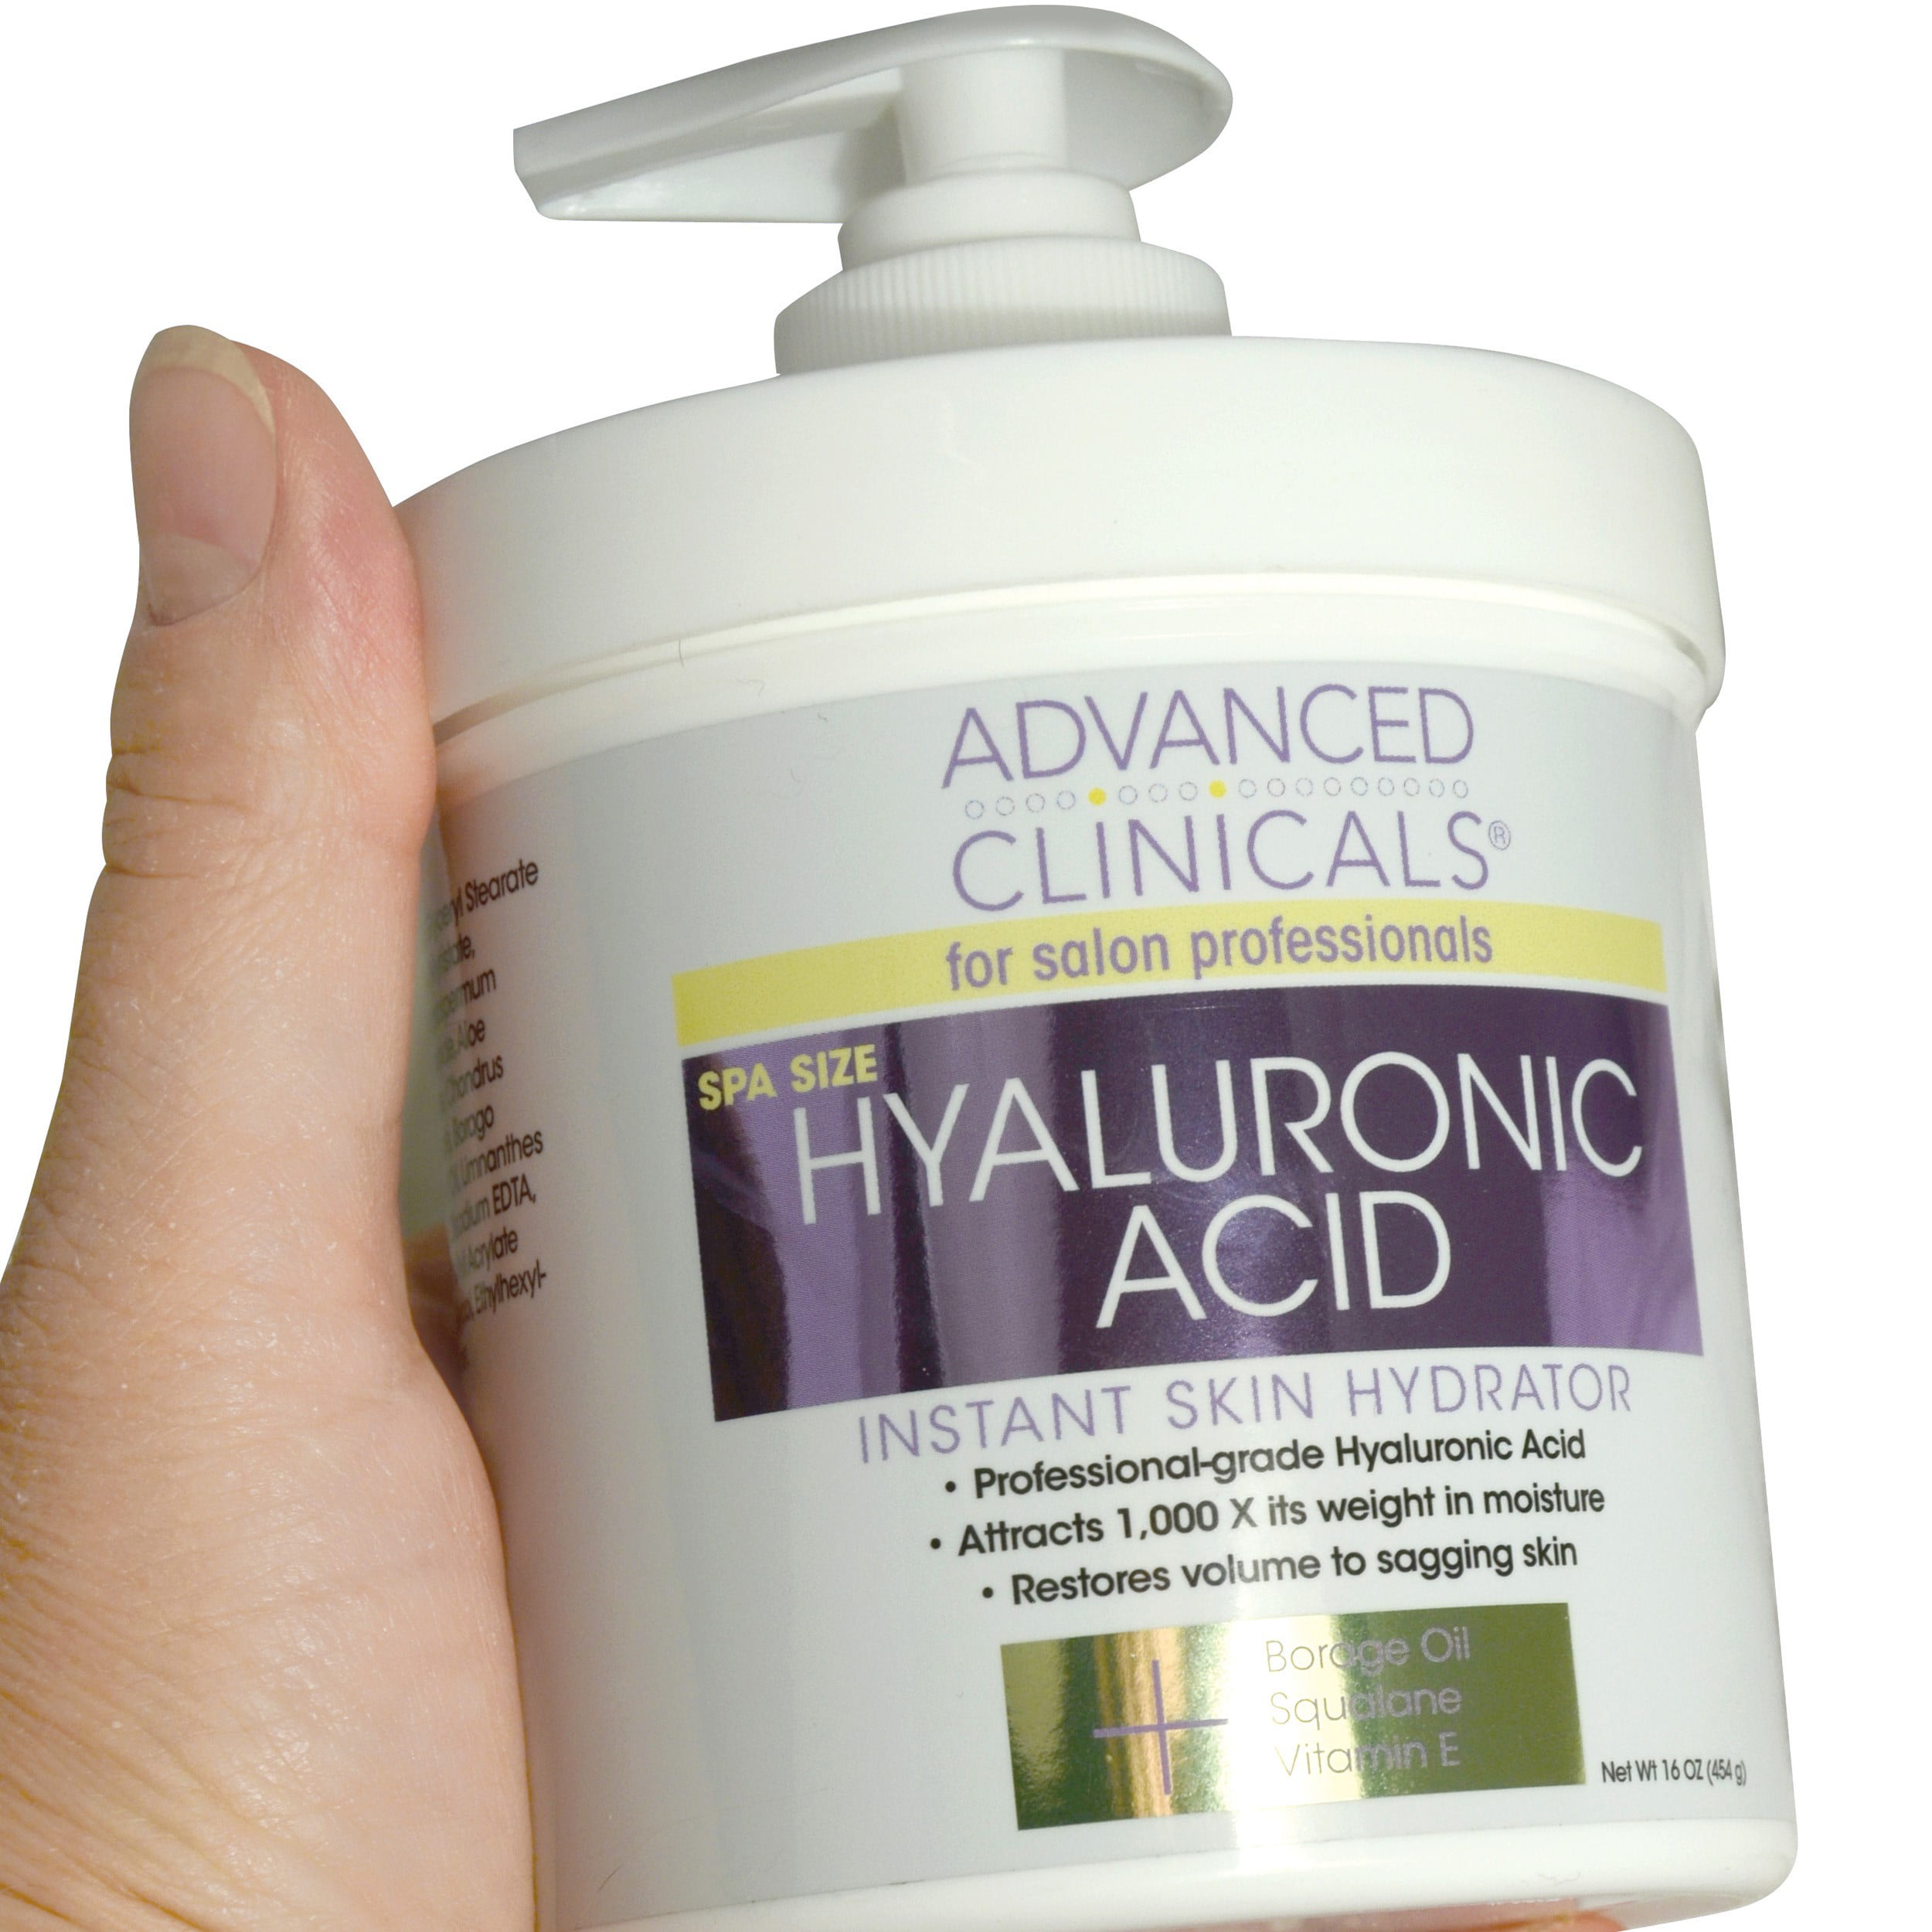 Advanced Clinicals Anti-Aging Hyaluronic Acid Cream for Face, Hands